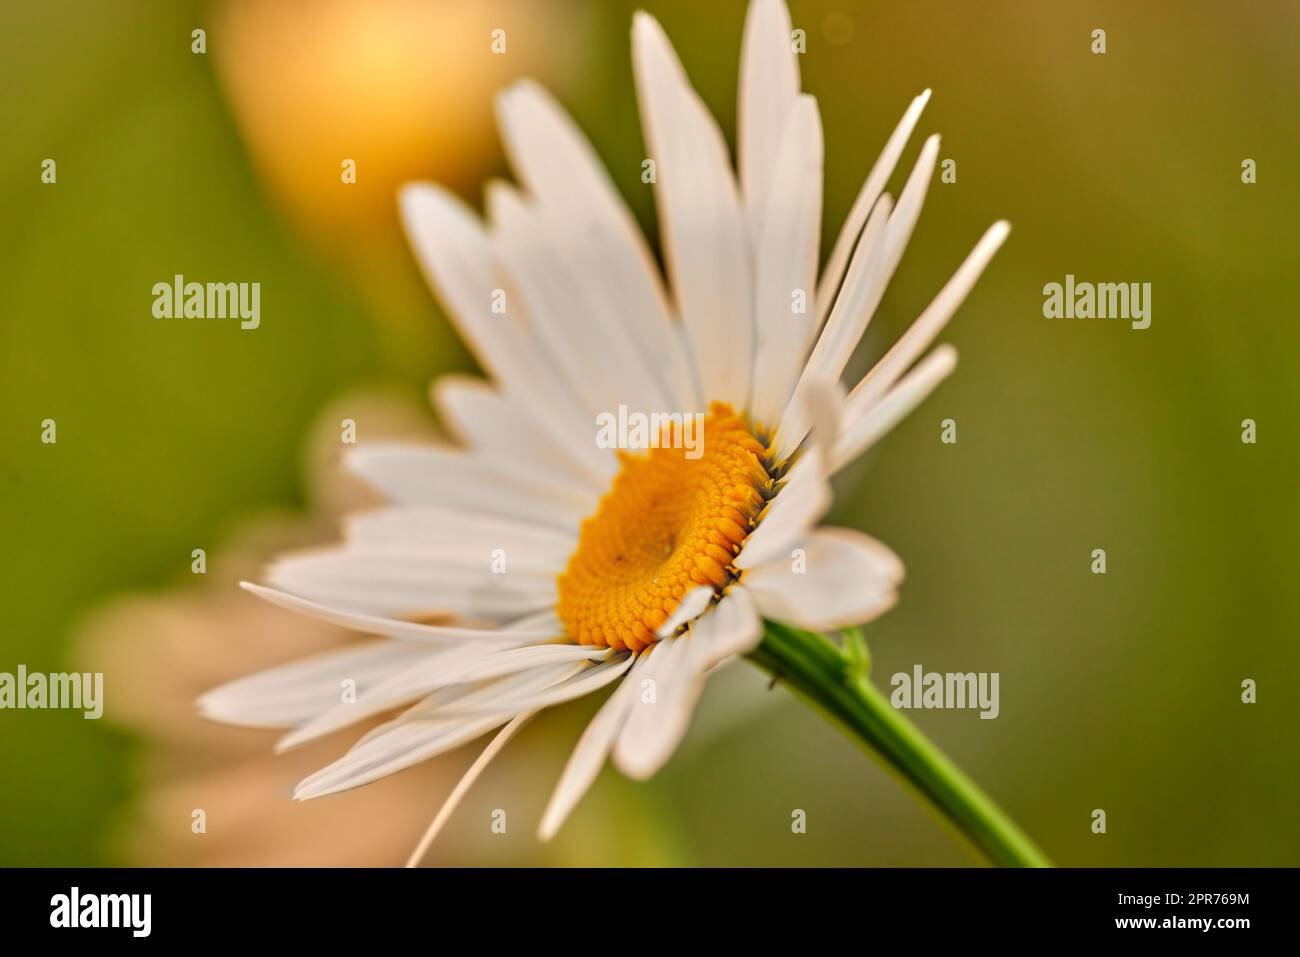 Closeup of a white daisy flower growing in a garden in summer with blurred background. Marguerite plants blooming in botanical garden in spring. Bunch of cheerful wildflower blooms in the backyard Stock Photo